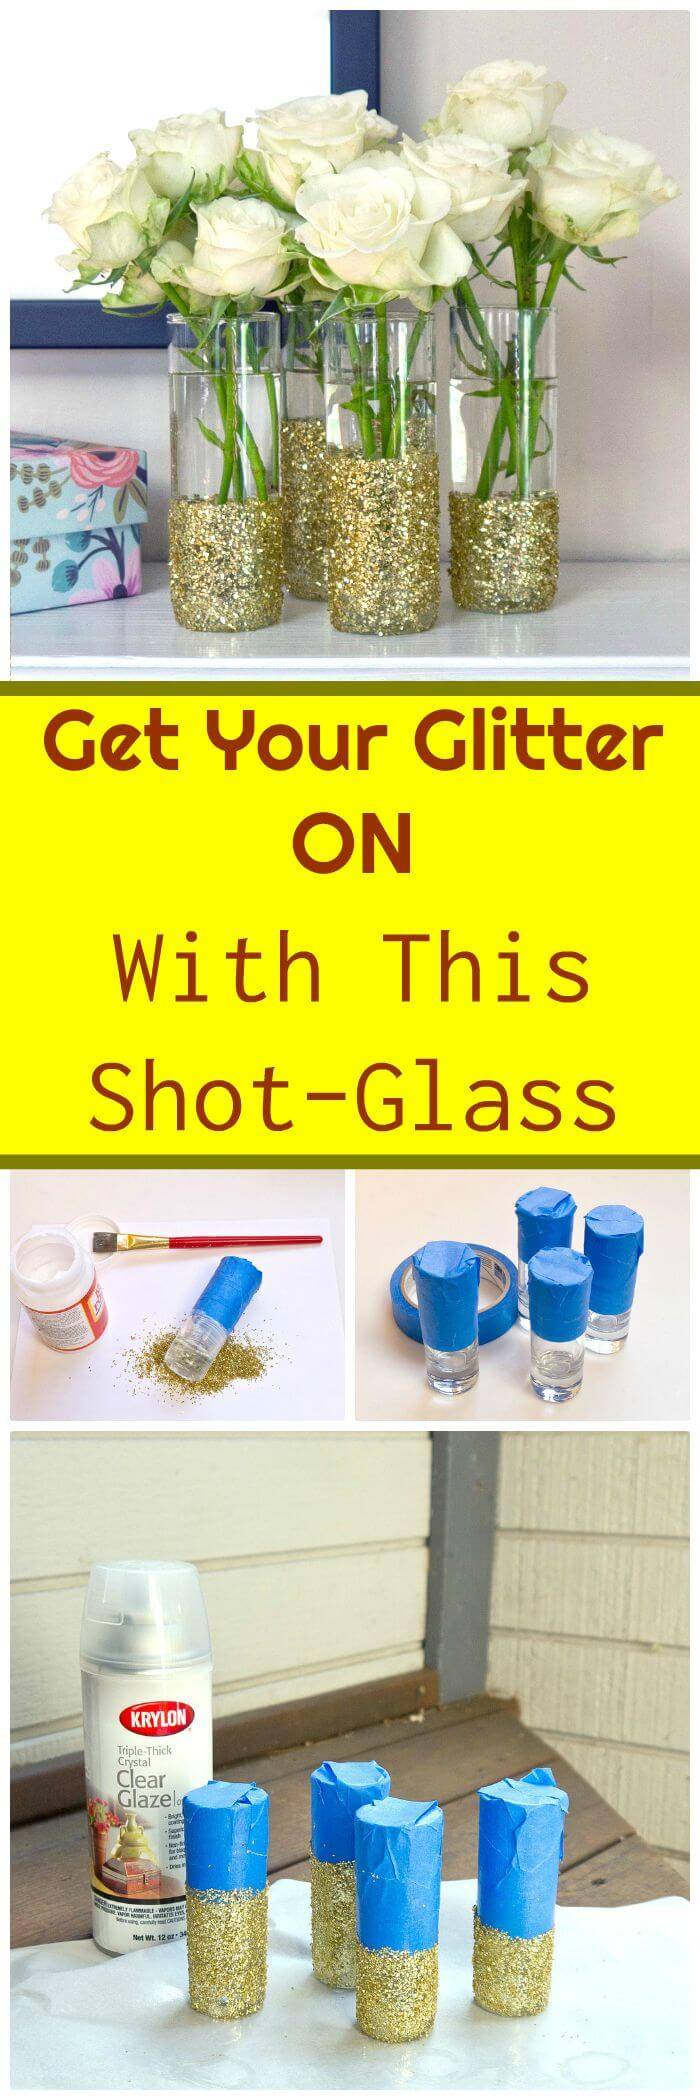 How To Get Your Glitter On With This Shot-Glass - Free Tutorial 